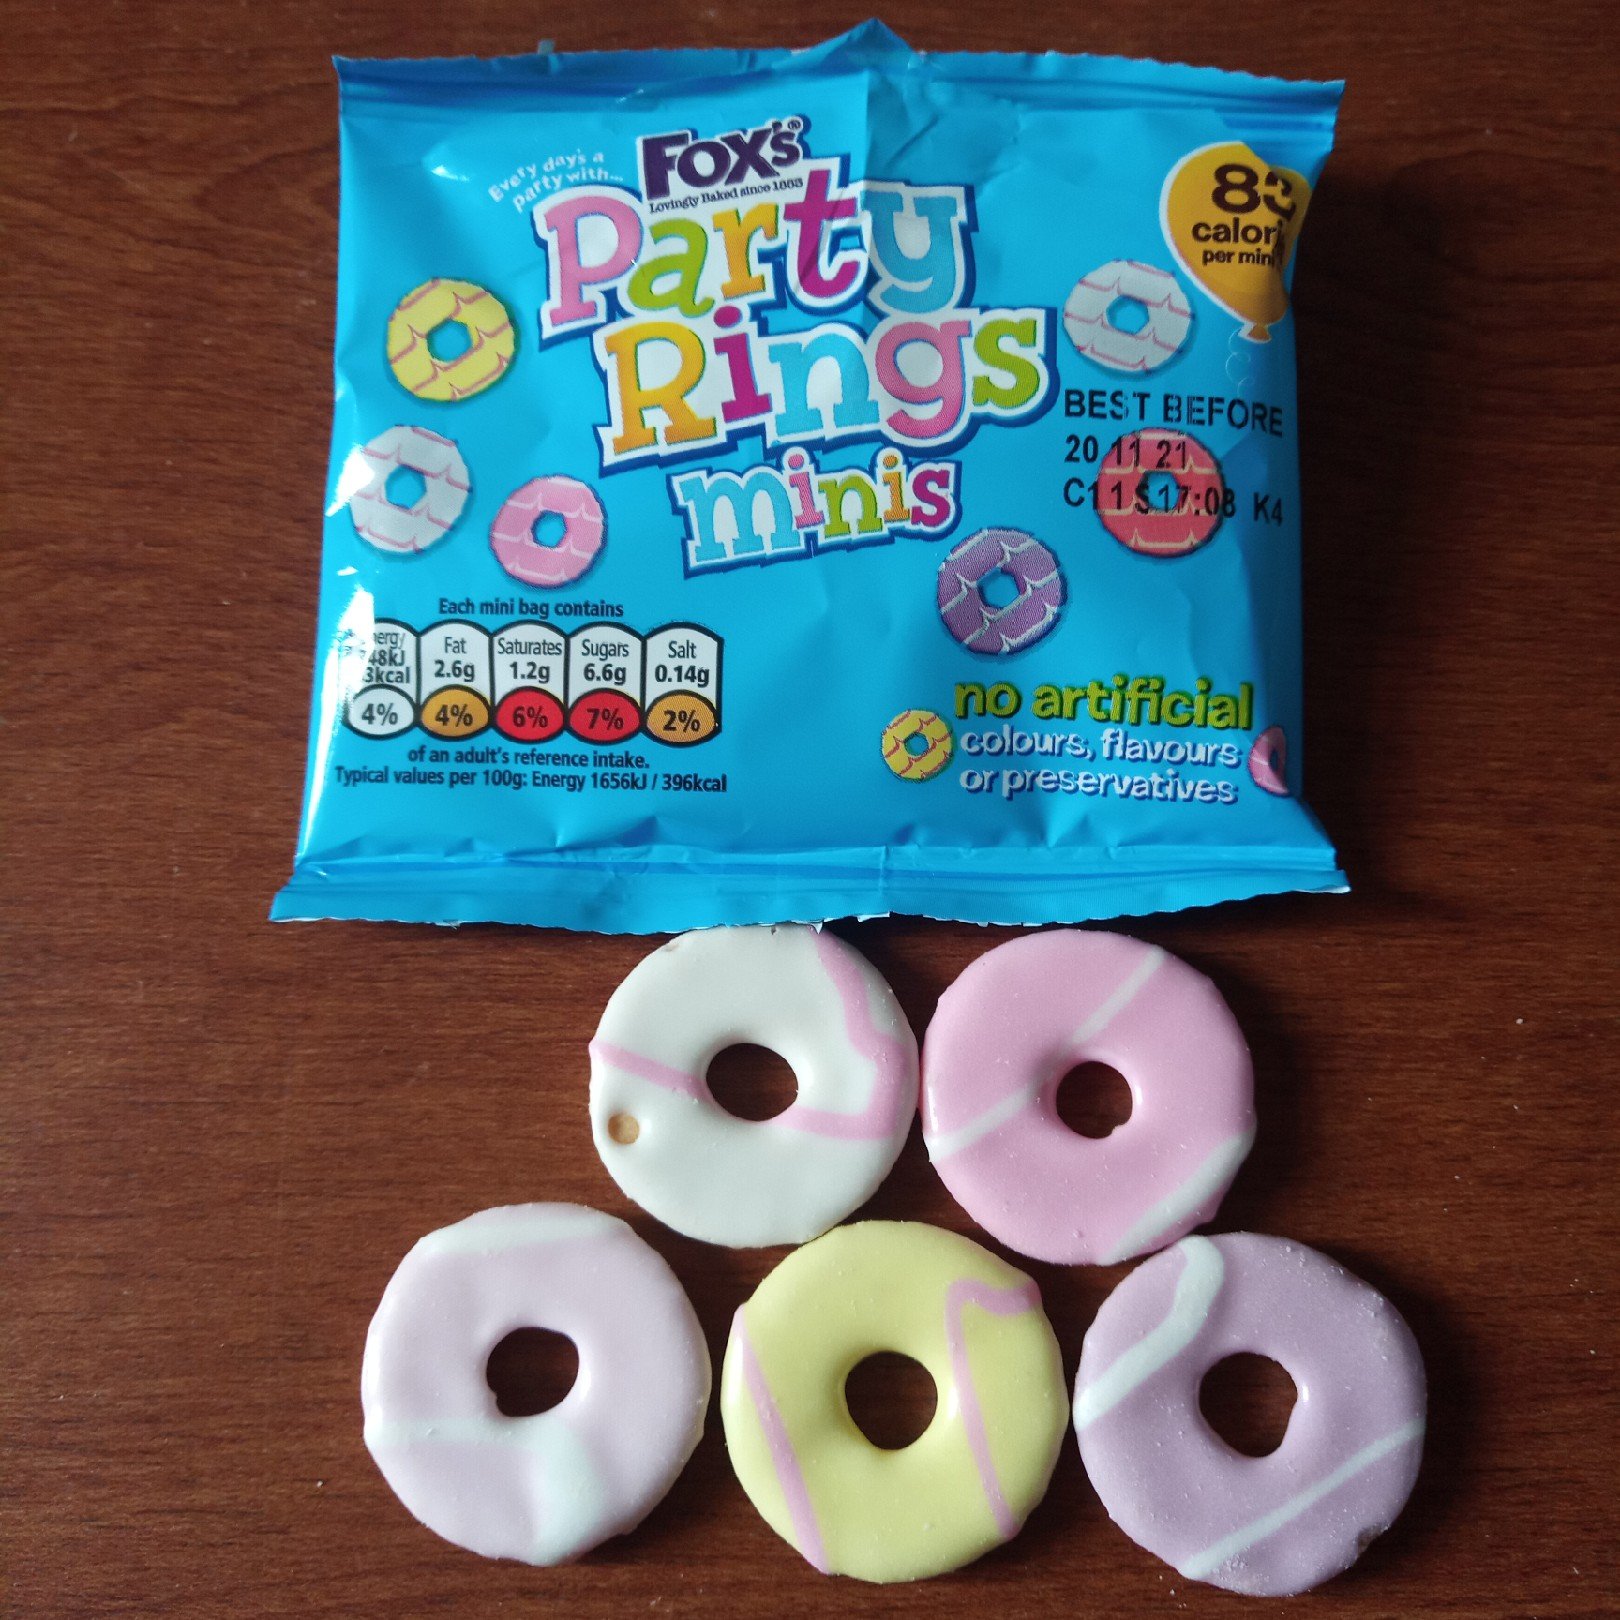 Foxs Mini Party Ice Rings 150g : Grocery & Gourmet Food - Amazon.com